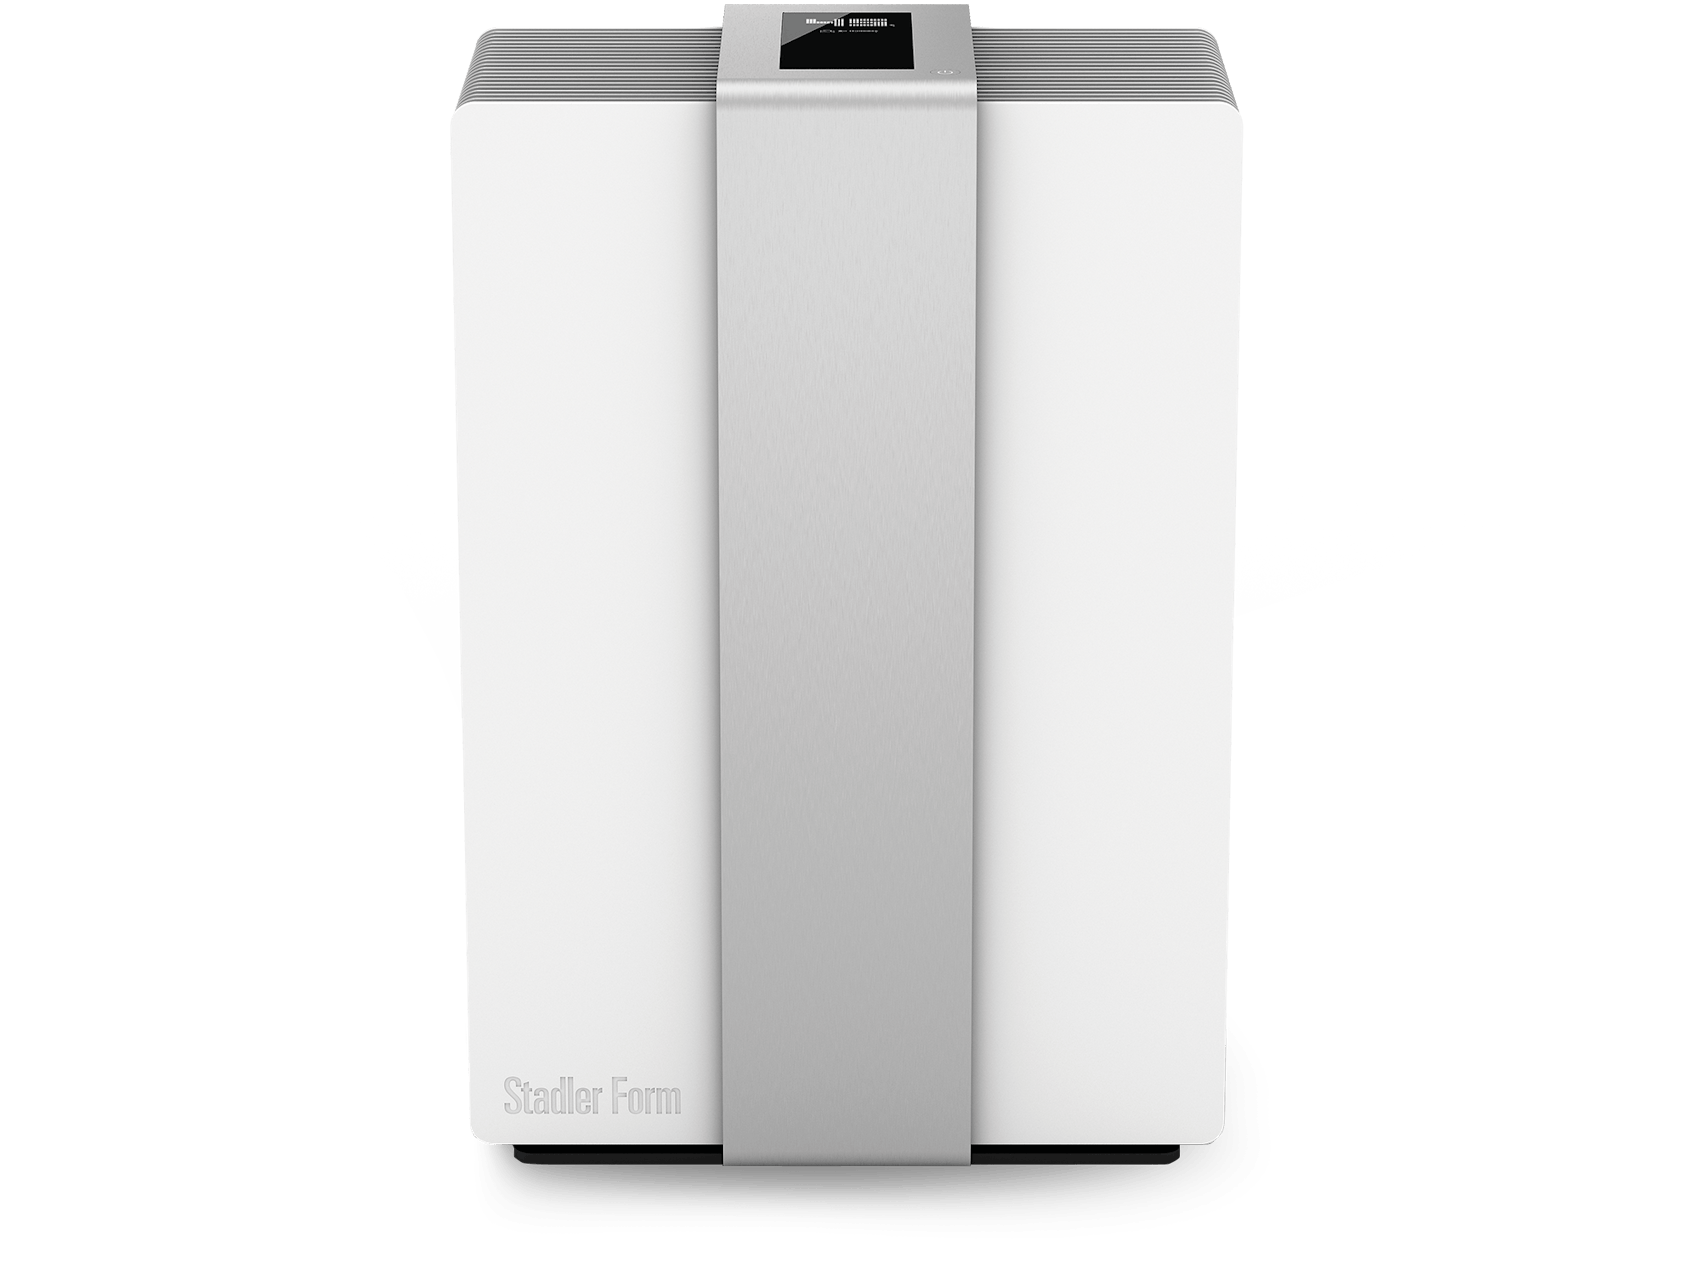 Robert air washer by Stadler Form in silver as front view